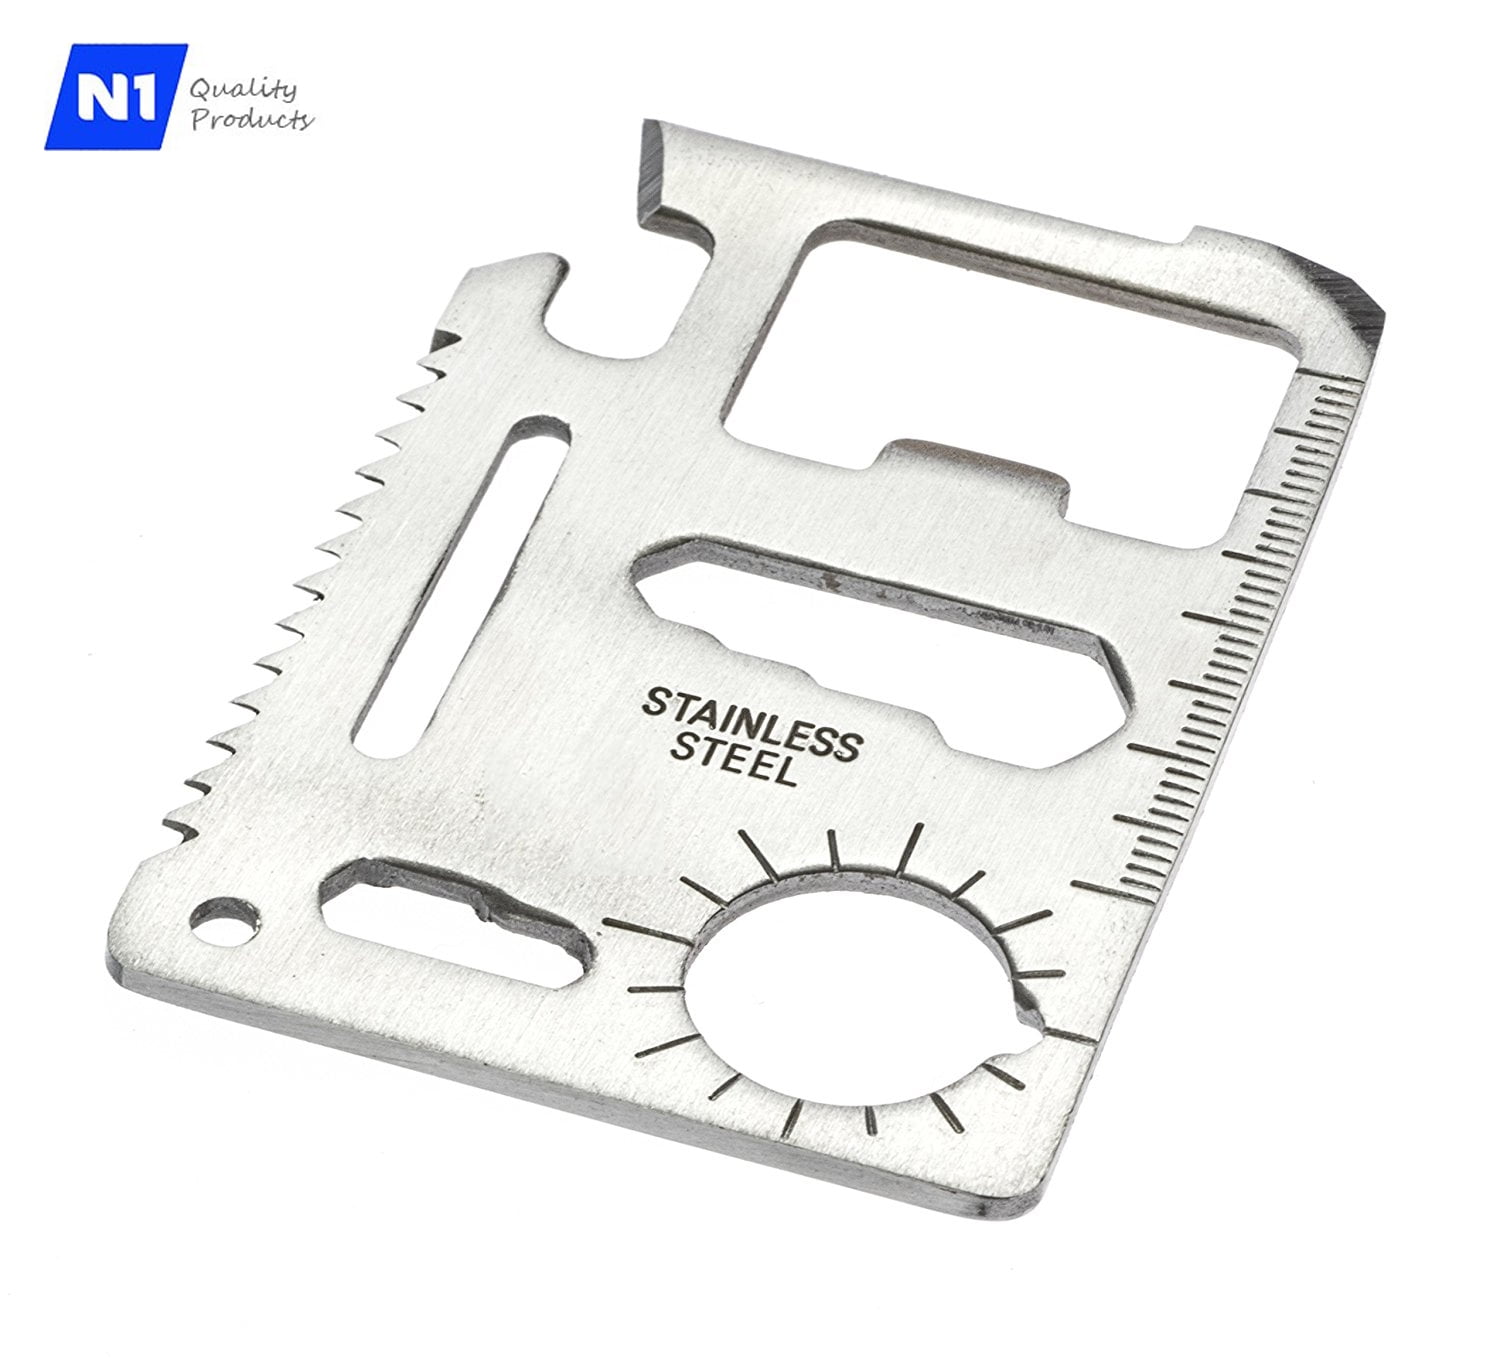 USA SELLER 11in1 Multi Tool Stainless Steel Credit Card Size Emergency survival 